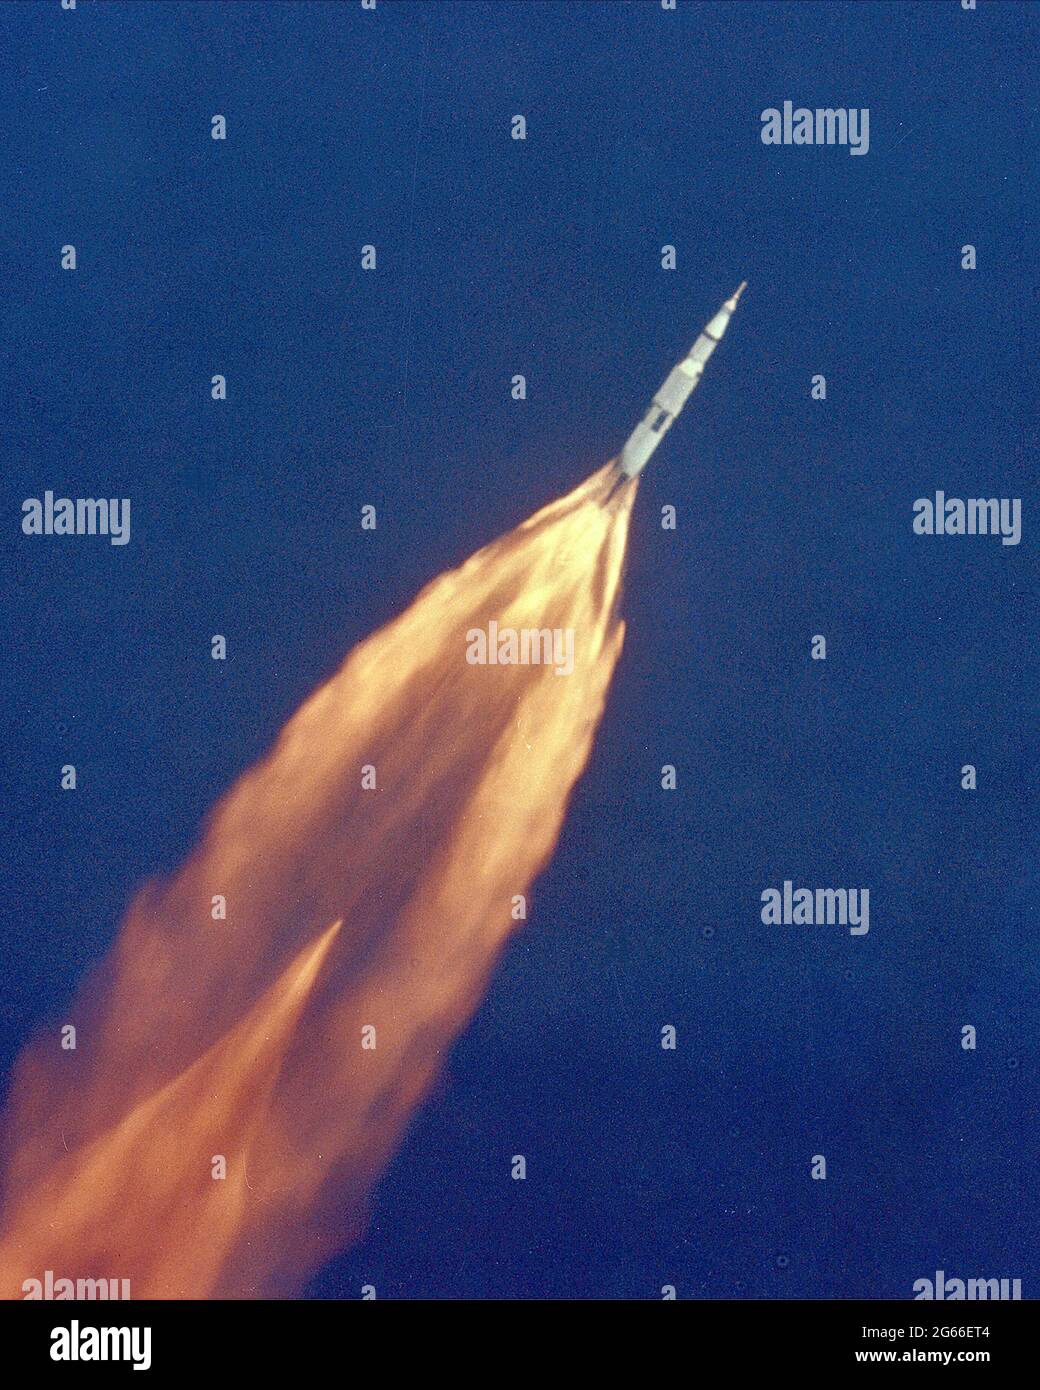 The Apollo 11 Saturn V space vehicle climbs toward orbit after liftoff from Pad 39A at 9:32 a.m. EDT. In 2 1/2 minutes of powered flight, the S-IC booster lifts the vehicle to an altitude of about 39 miles some 55 miles downrange. This photo was taken with a 70mm telescopic camera mounted in an Air Force EC-135N plane. Onboard are astronauts Neil A. Armstrong, Michael Collins and Edwin E. Aldrin, Jr. Stock Photo